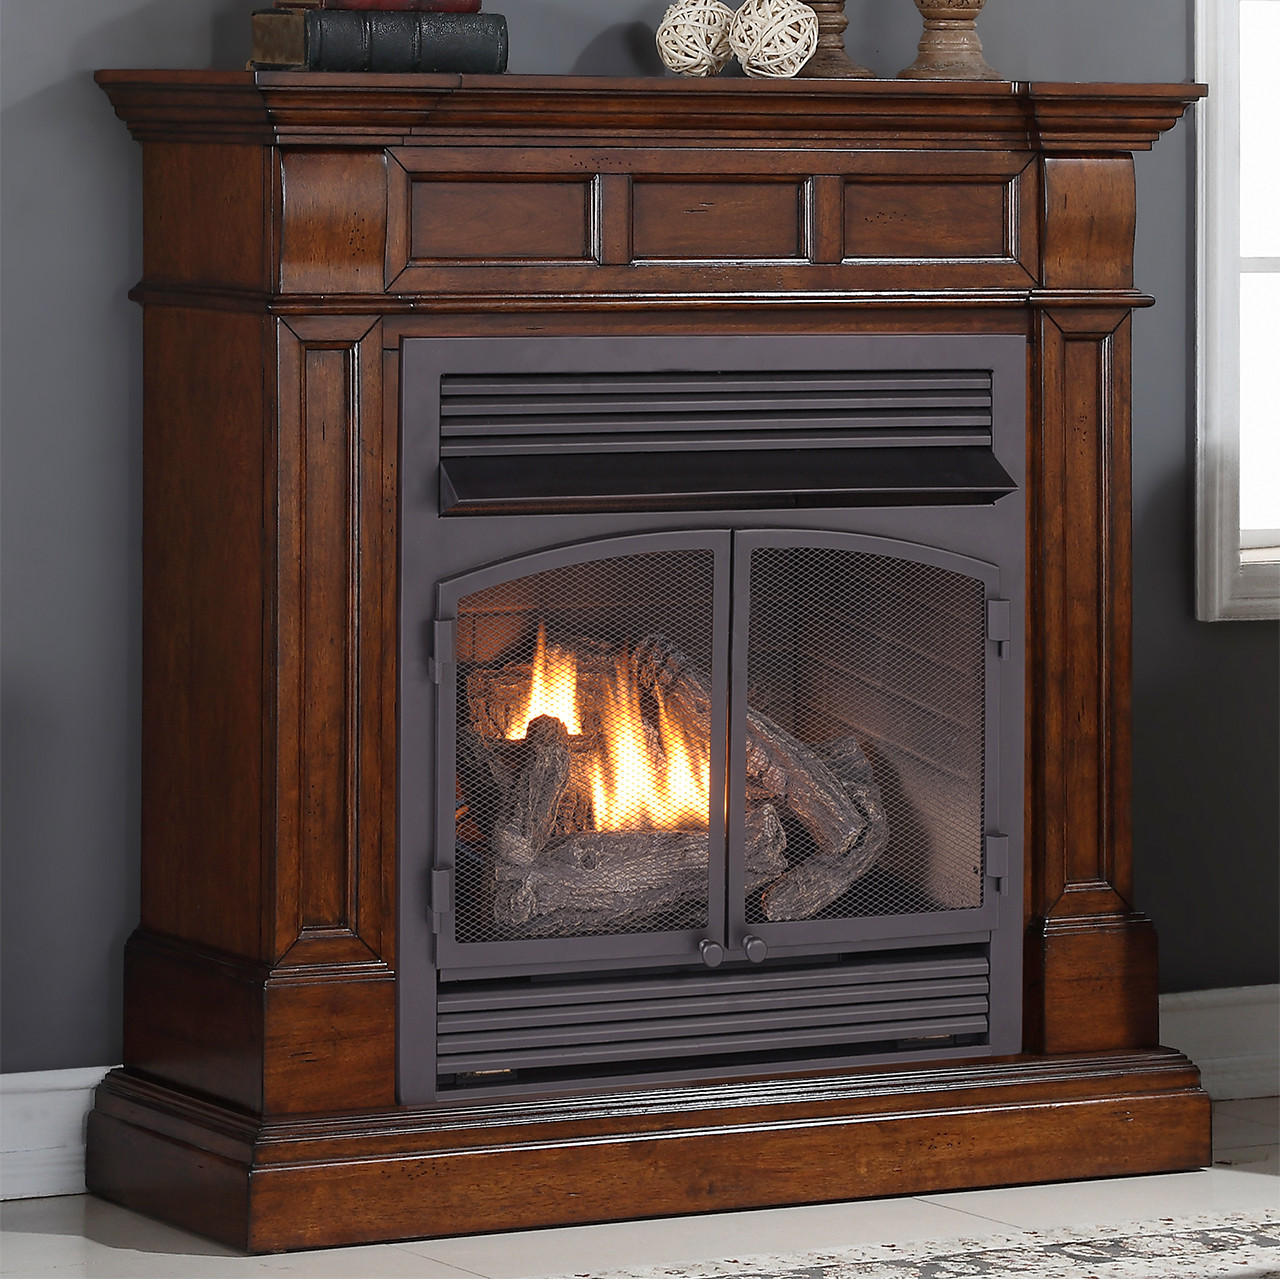 Duluth Forge Dual Fuel Ventless Gas Fireplace - 32,000 BTU, T-Stat